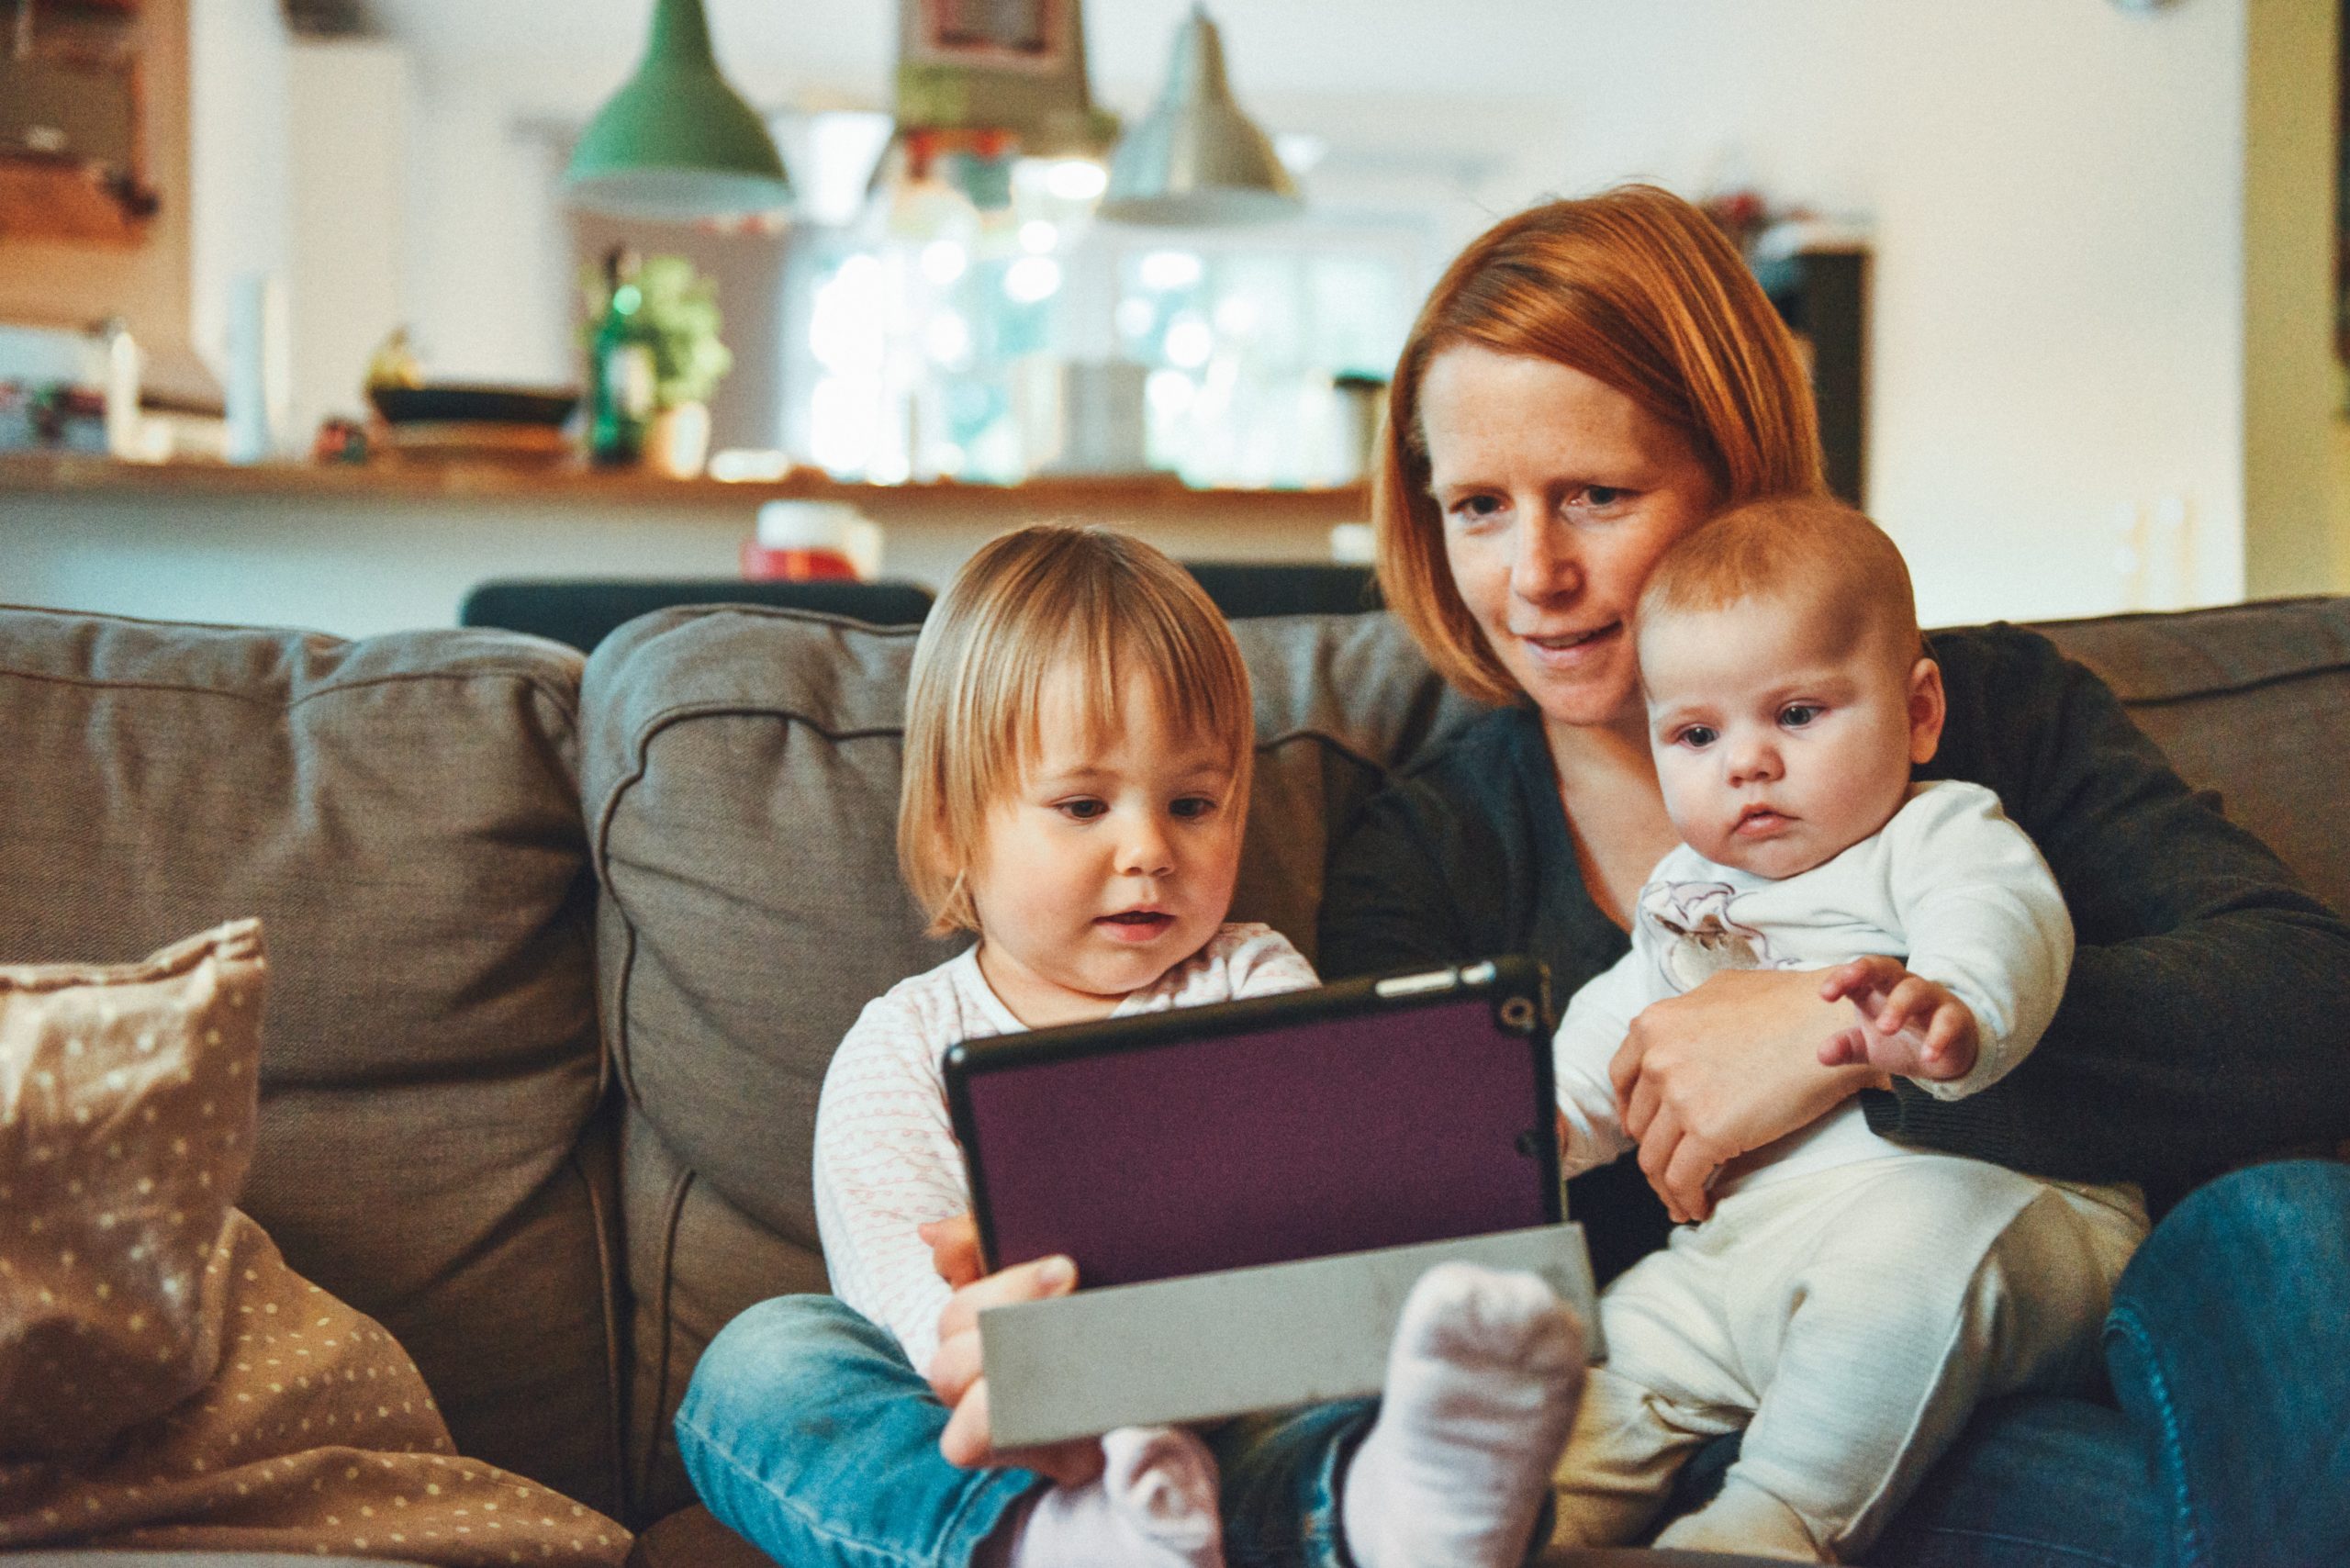 Parent with young child and baby looking at ipad on sofa